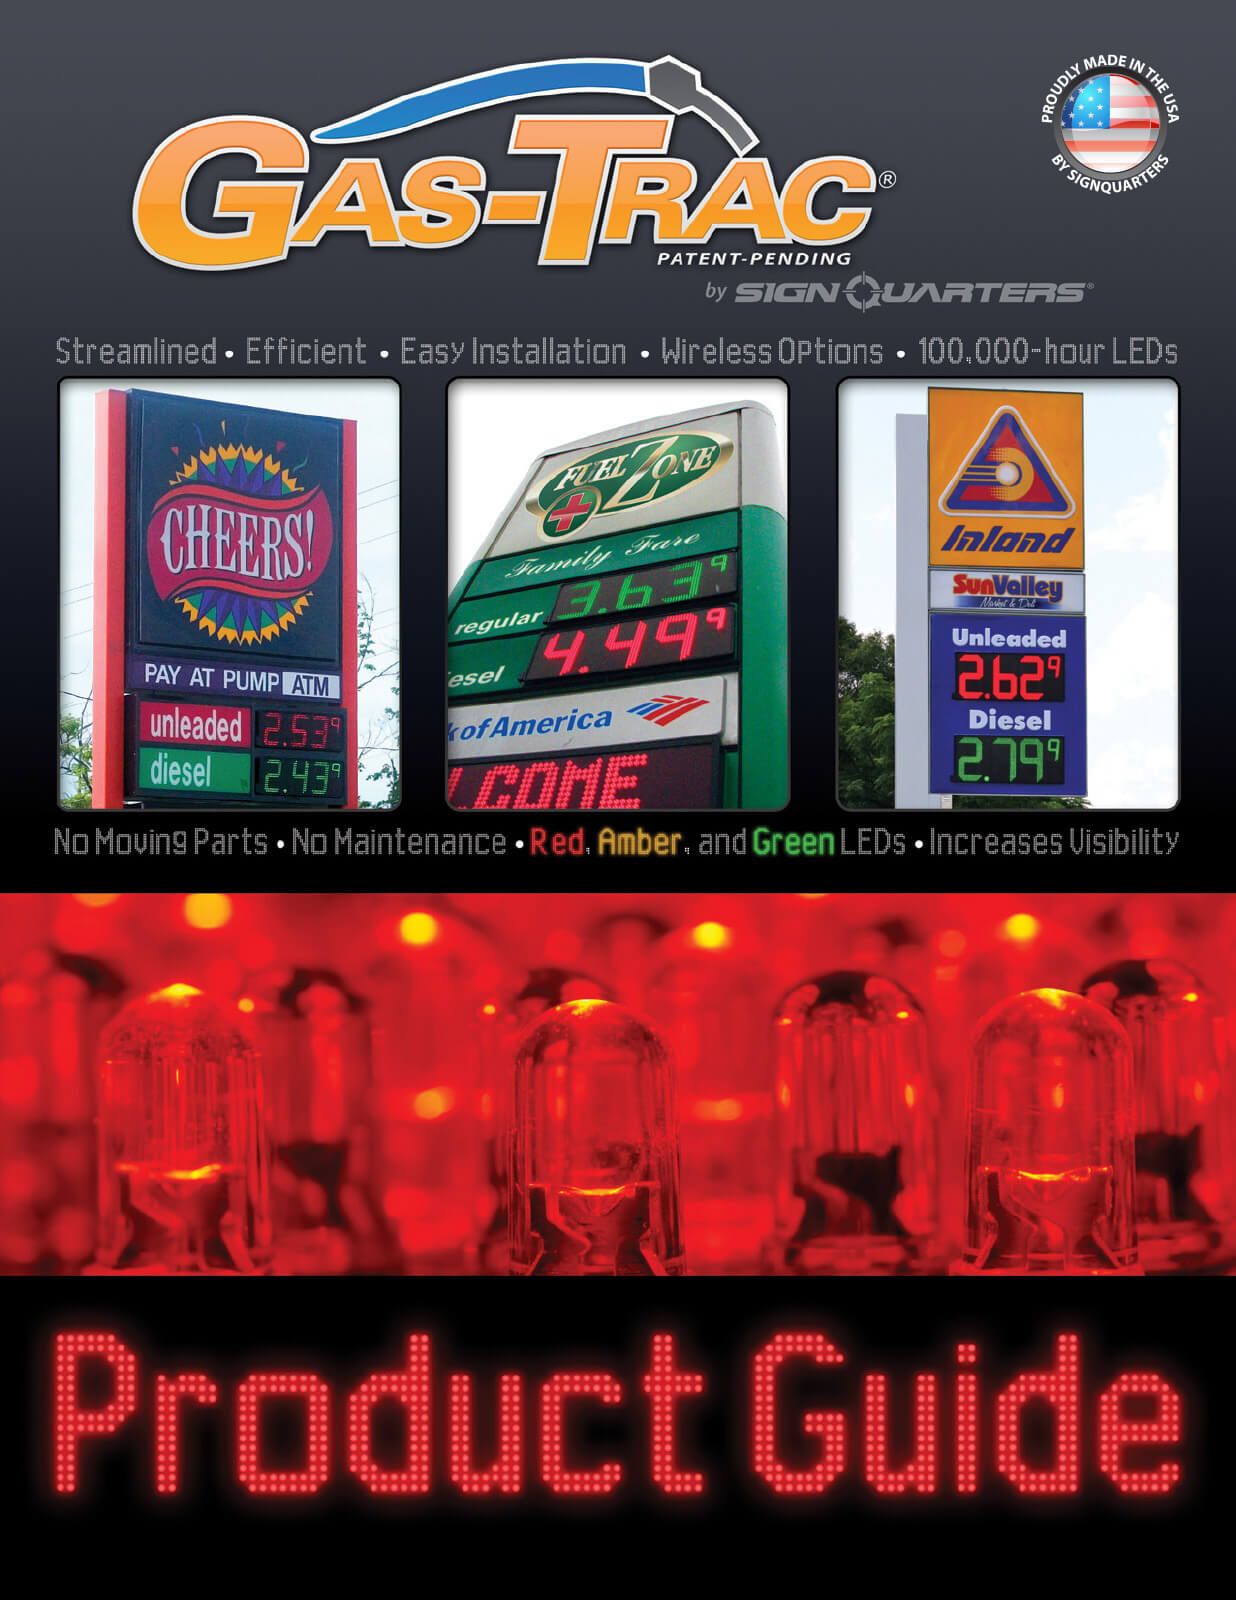 Gas-Trac catalog cover by EyeSite Creations